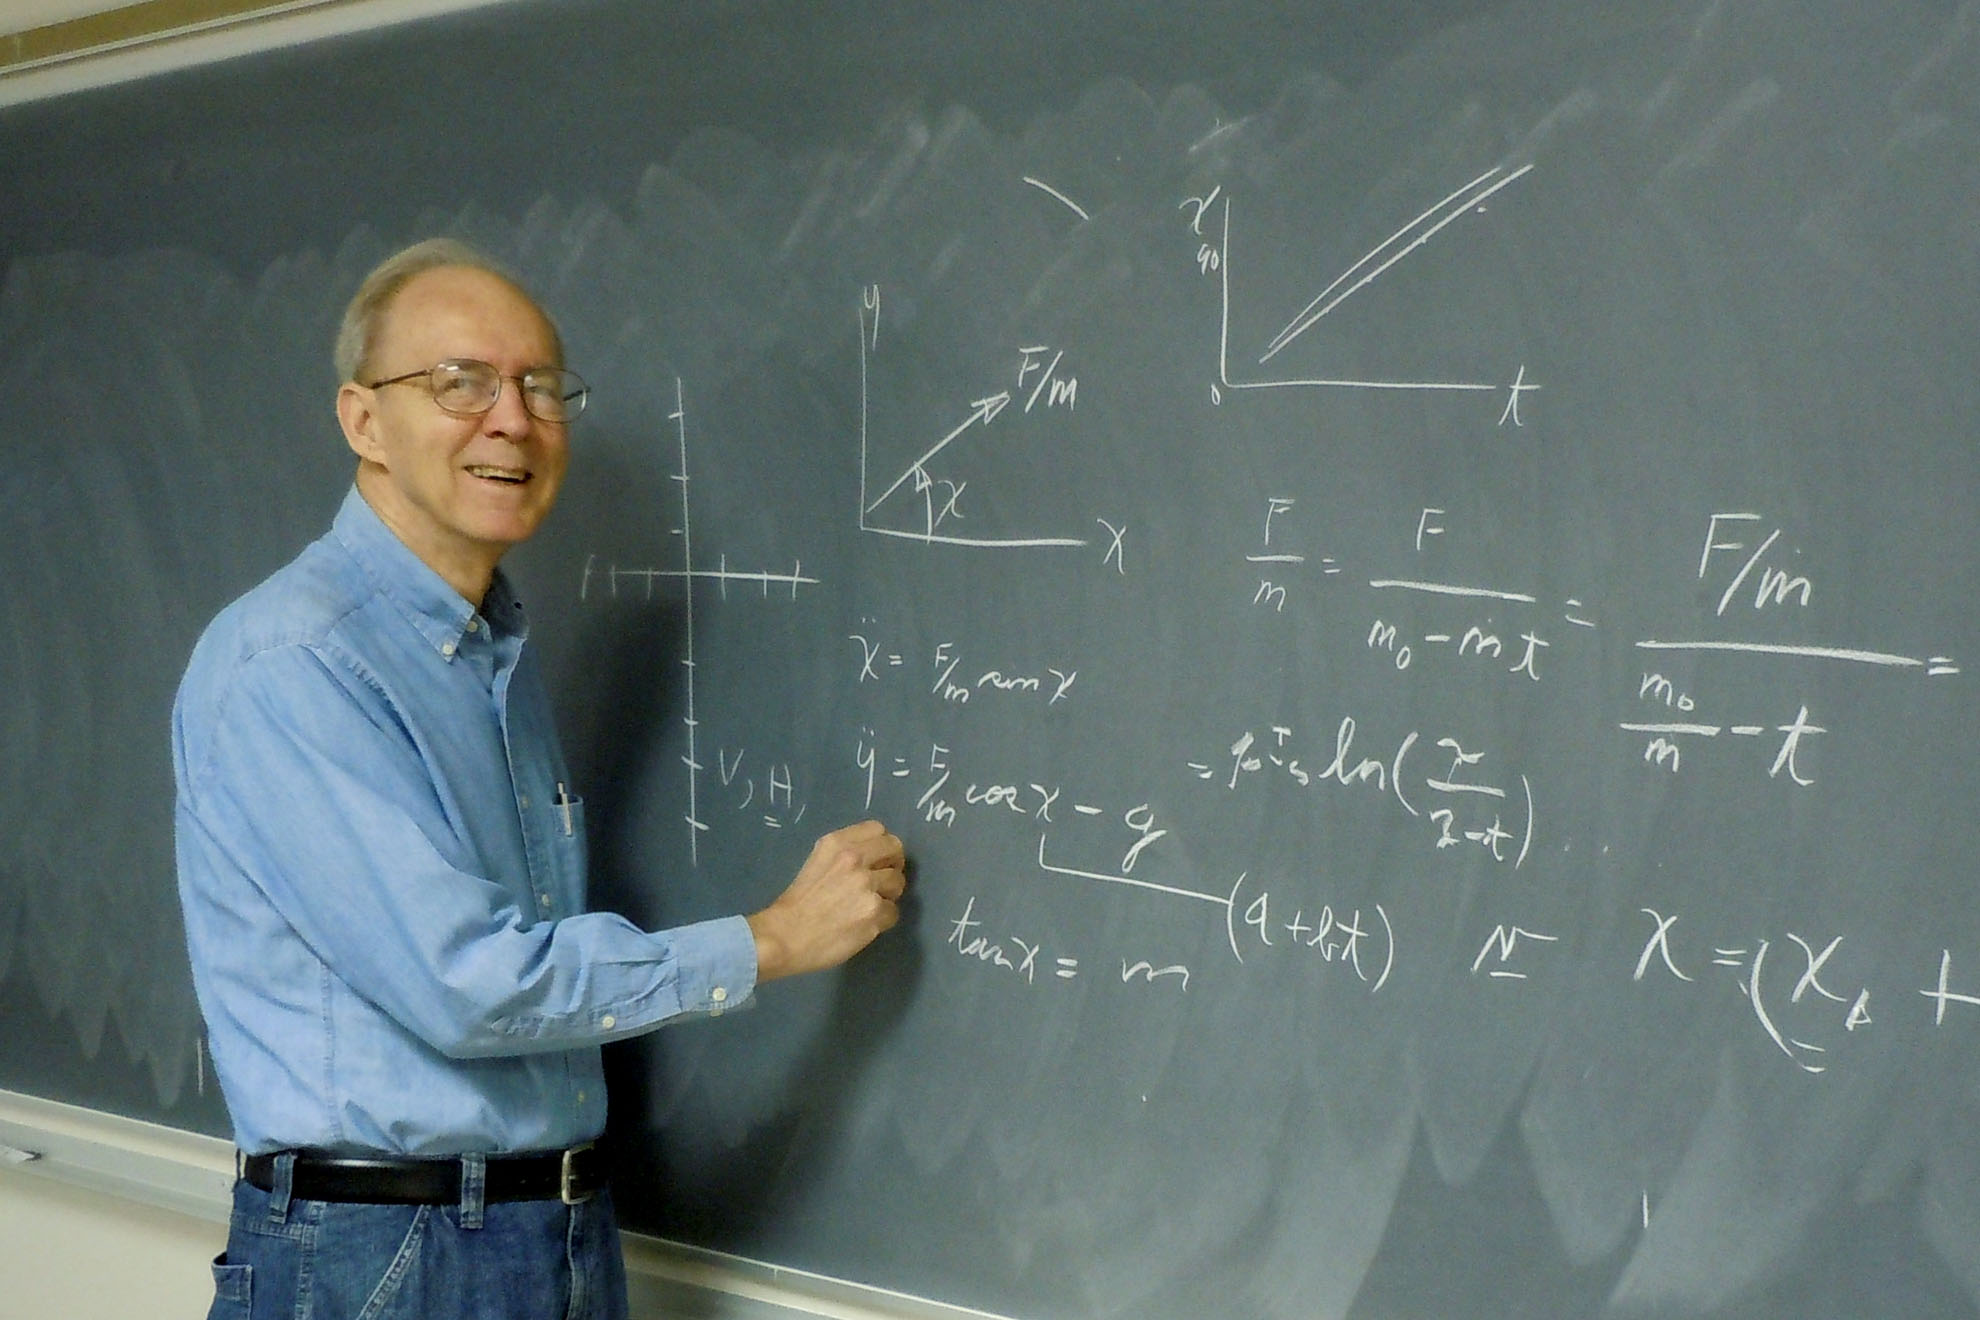 Program presenter, F Don Cooper, at a chalkboard with equations written on it.